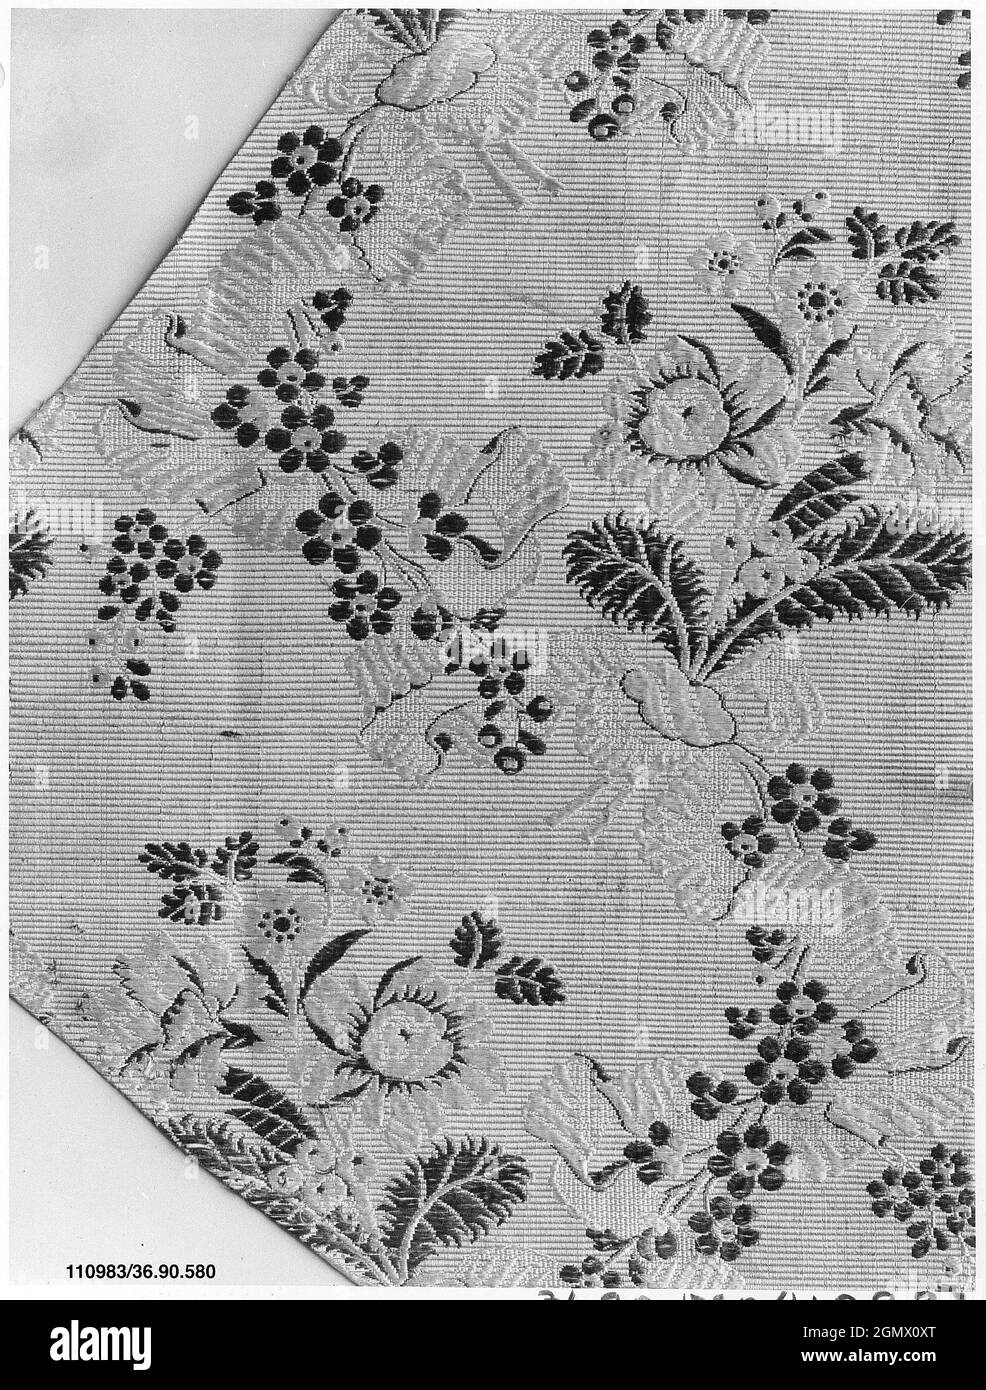 Piece. Date: mid-18th century; Culture: French; Medium: Silk; Dimensions: L. 25 x W. 14 inches (63.5 x 35.6 cm); Classification: Textiles-Woven Stock Photo